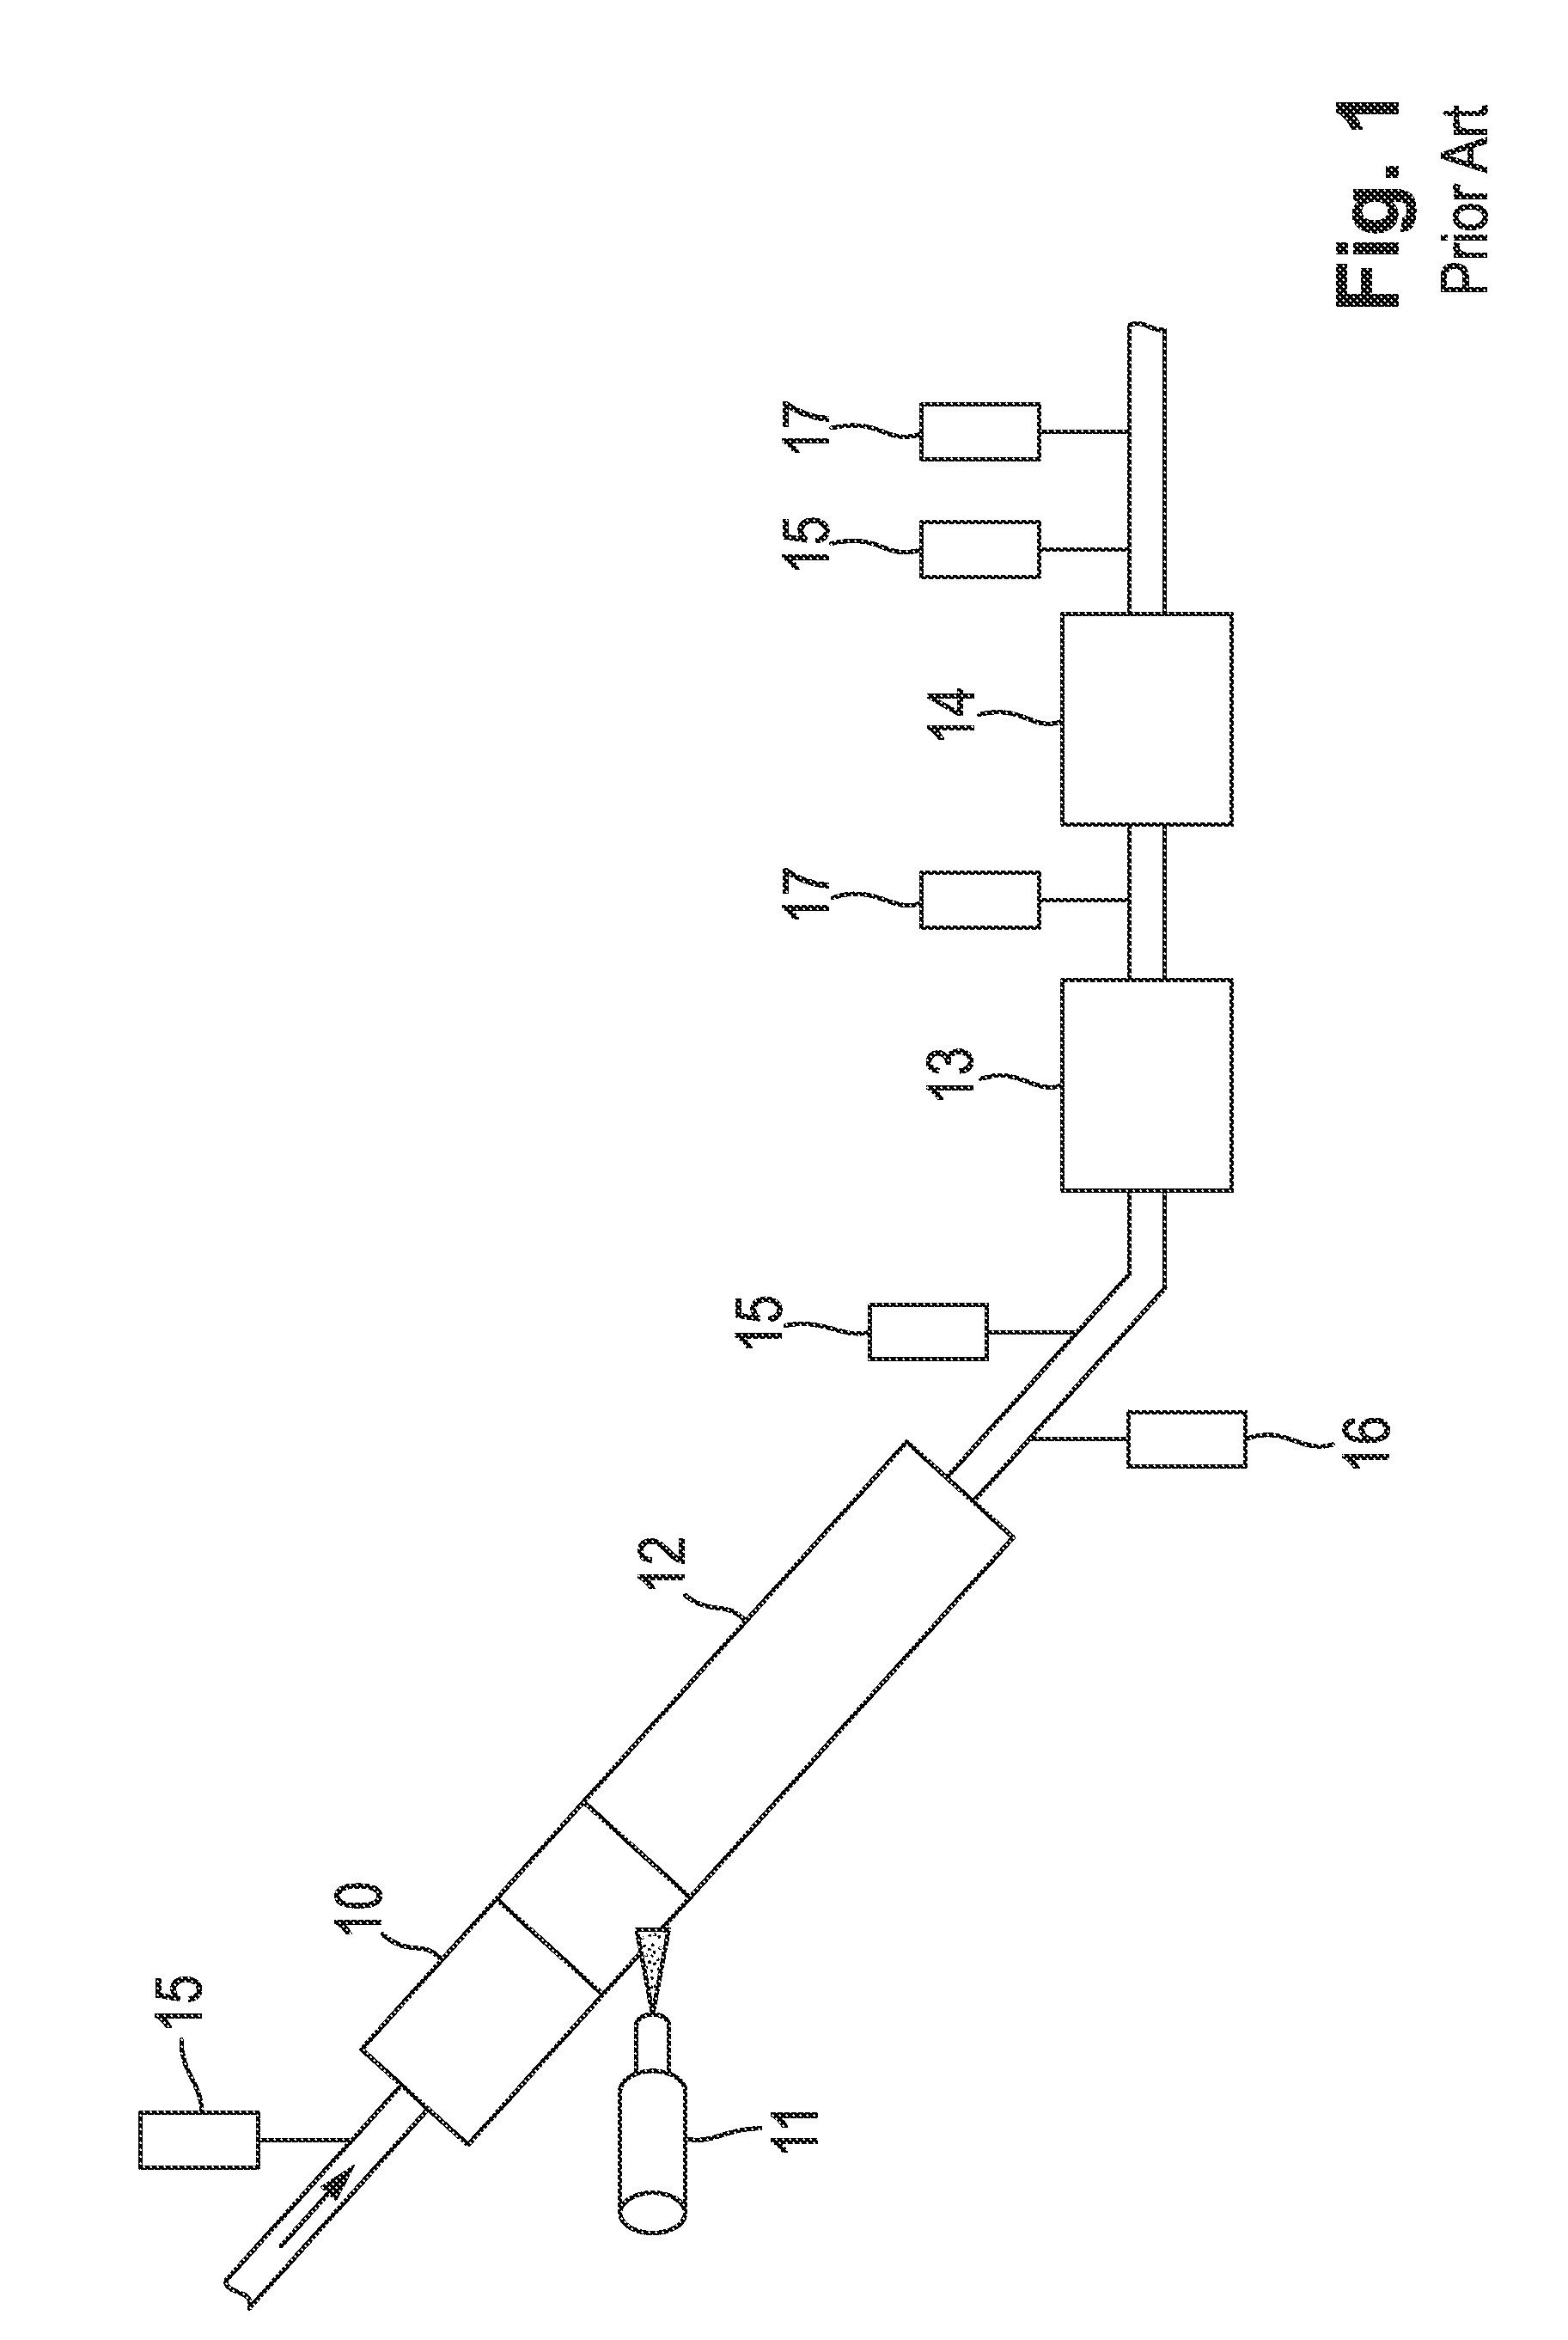 Method for operating an exhaust gas aftertreatment system with at least one first SCR device and at least one second SCR device